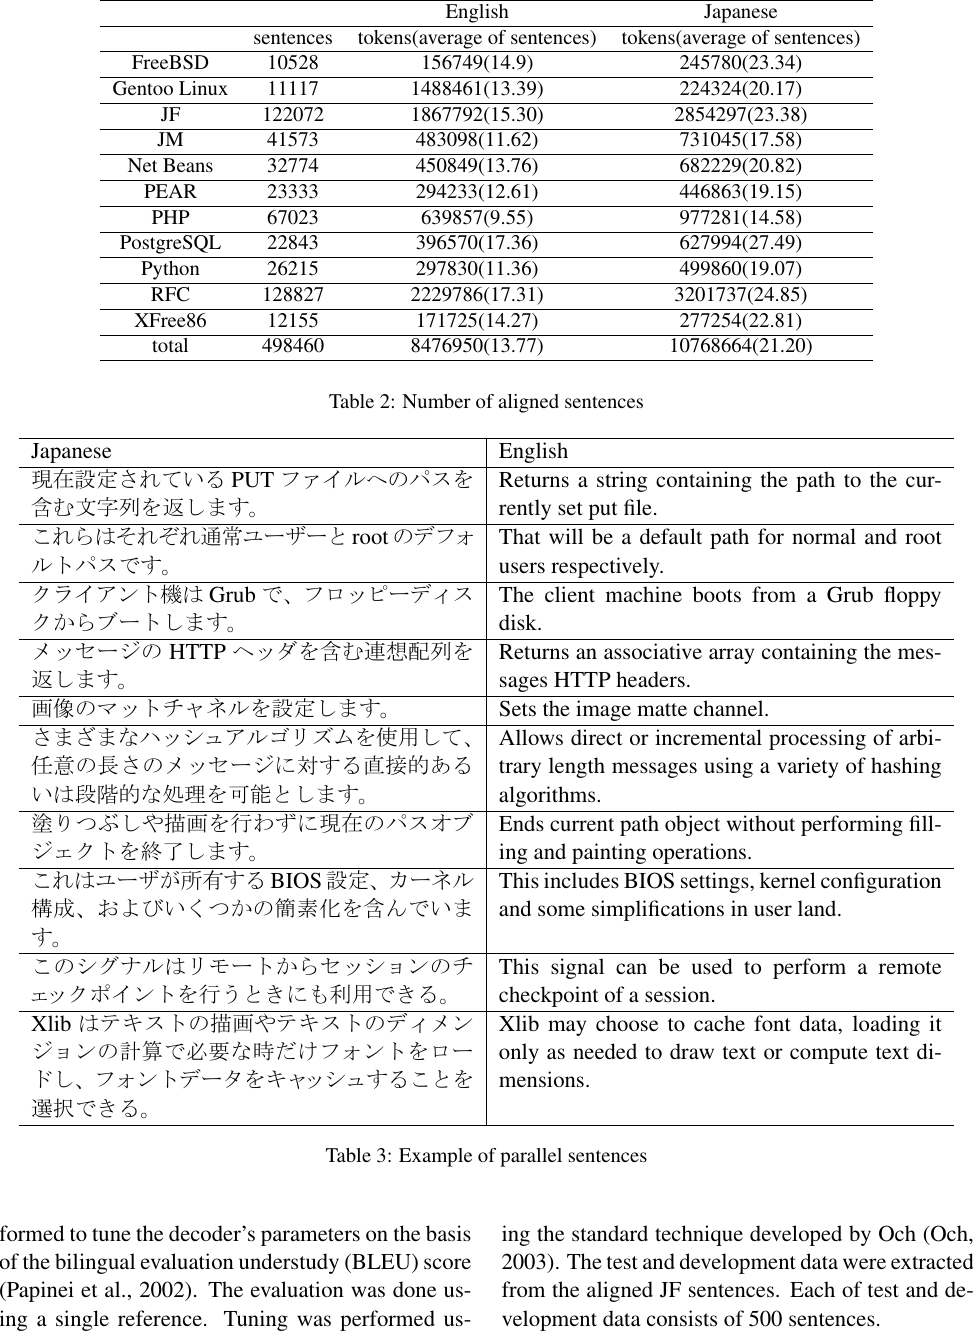 Page 5 of 6 - Development Of A Japanese-English Software Manual Parallel Corpus